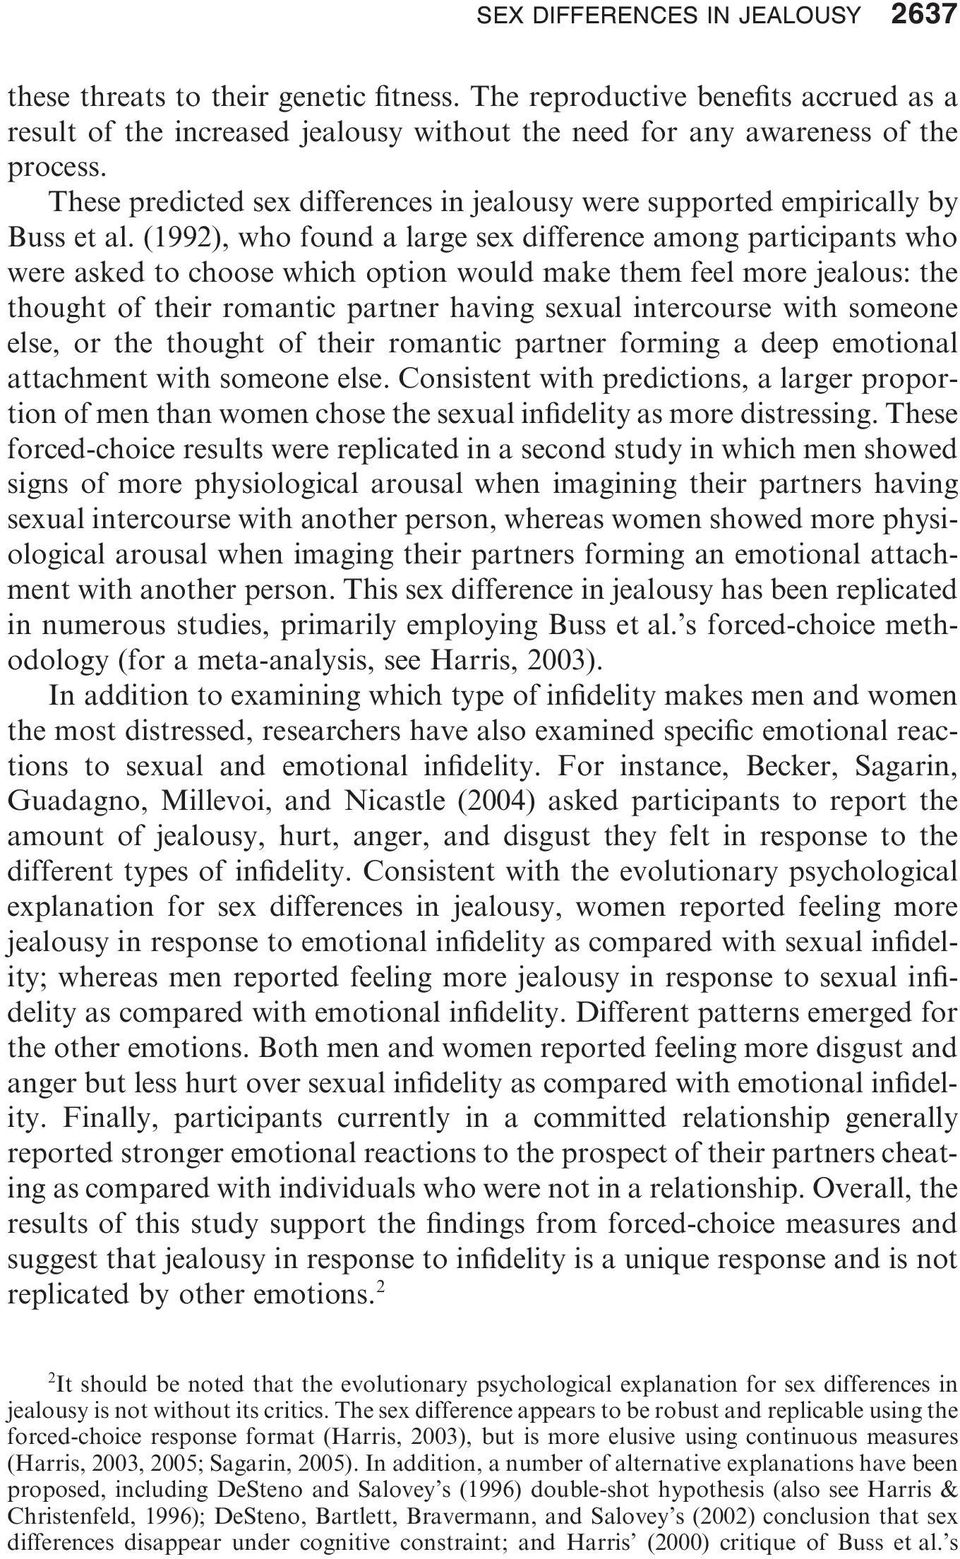 (1992), who found a large sex difference among participants who were asked to choose which option would make them feel more jealous: the thought of their romantic partner having sexual intercourse